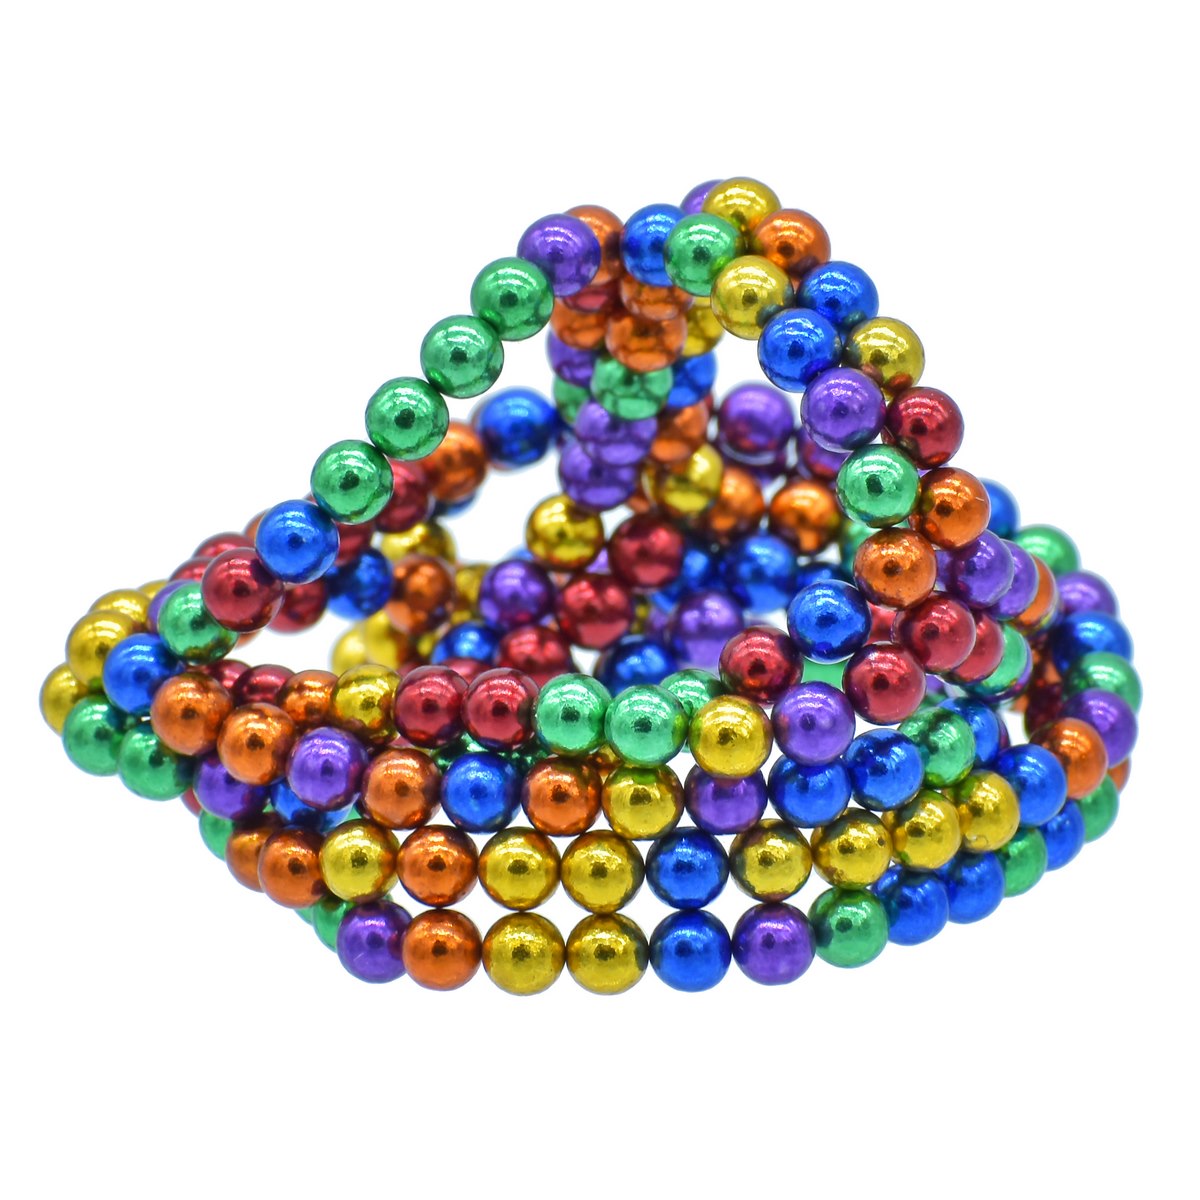 jags-mumbai Beads Magnetic Round Bead Color Matching Game